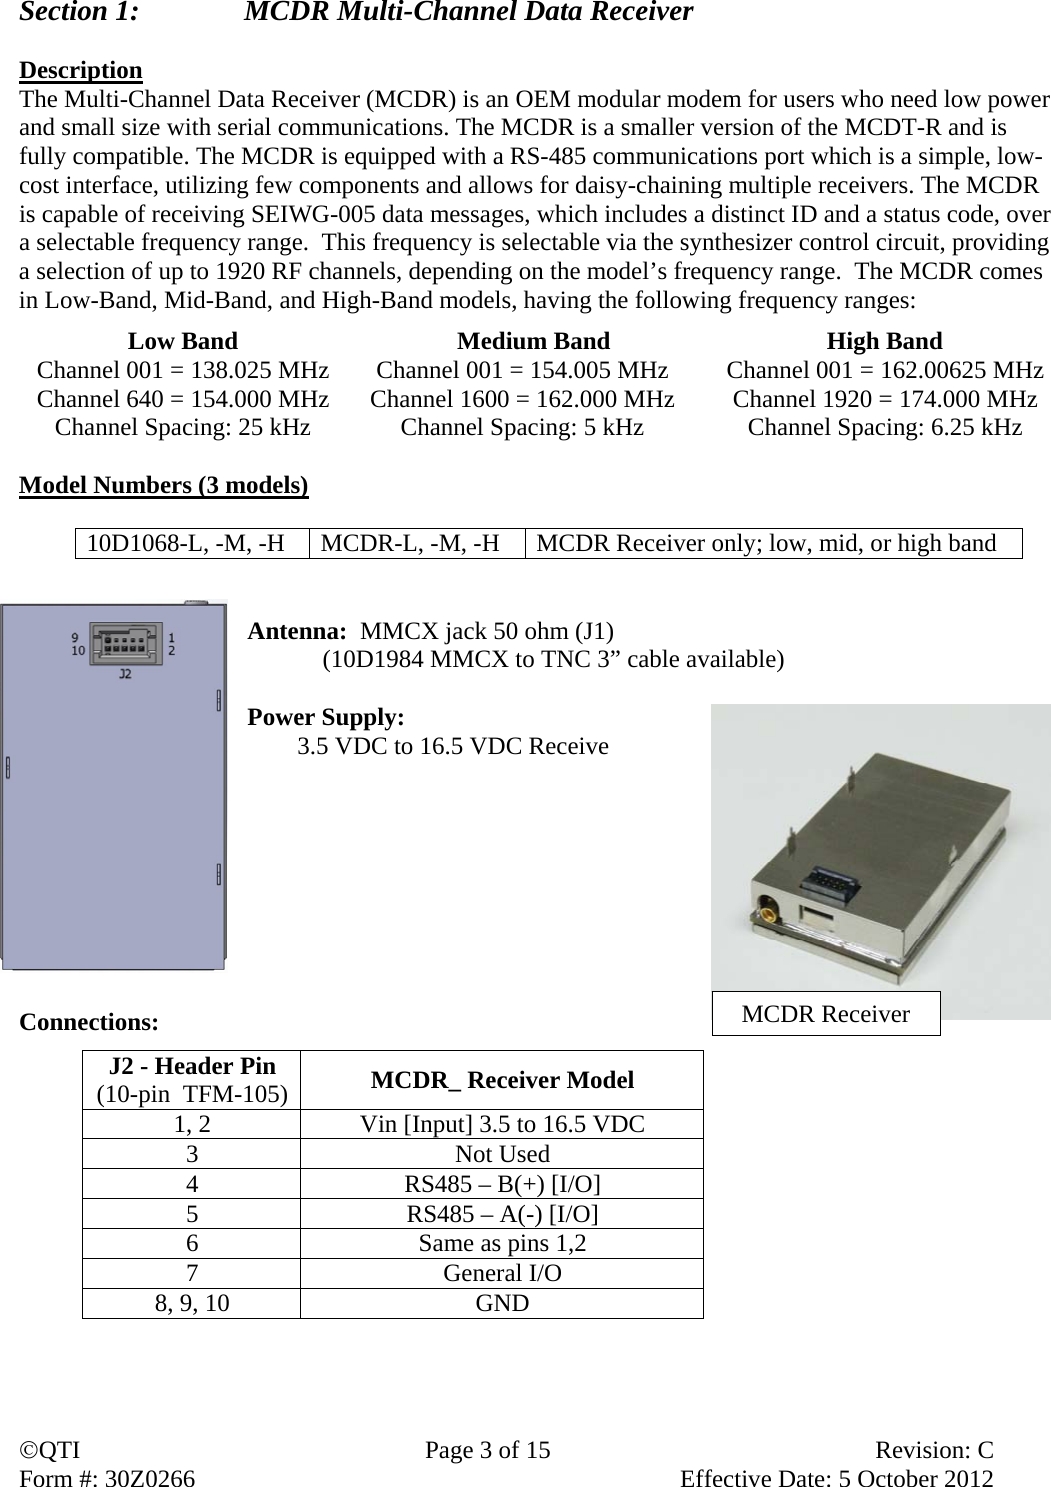 QTI  Page 3 of 15  Revision: C Form #: 30Z0266    Effective Date: 5 October 2012 Section 1:    MCDR Multi-Channel Data Receiver  Description The Multi-Channel Data Receiver (MCDR) is an OEM modular modem for users who need low power and small size with serial communications. The MCDR is a smaller version of the MCDT-R and is fully compatible. The MCDR is equipped with a RS-485 communications port which is a simple, low-cost interface, utilizing few components and allows for daisy-chaining multiple receivers. The MCDR is capable of receiving SEIWG-005 data messages, which includes a distinct ID and a status code, over a selectable frequency range.  This frequency is selectable via the synthesizer control circuit, providing a selection of up to 1920 RF channels, depending on the model’s frequency range.  The MCDR comes in Low-Band, Mid-Band, and High-Band models, having the following frequency ranges: Low Band  Medium Band  High Band Channel 001 = 138.025 MHz  Channel 001 = 154.005 MHz  Channel 001 = 162.00625 MHz Channel 640 = 154.000 MHz  Channel 1600 = 162.000 MHz  Channel 1920 = 174.000 MHz Channel Spacing: 25 kHz  Channel Spacing: 5 kHz  Channel Spacing: 6.25 kHz  Model Numbers (3 models)  10D1068-L, -M, -H  MCDR-L, -M, -H  MCDR Receiver only; low, mid, or high band   Antenna:  MMCX jack 50 ohm (J1)   (10D1984 MMCX to TNC 3” cable available)  Power Supply:         3.5 VDC to 16.5 VDC Receive        Connections:            J2 - Header Pin (10-pin  TFM-105) MCDR_ Receiver Model 1, 2  Vin [Input] 3.5 to 16.5 VDC 3 Not Used 4  RS485 – B(+) [I/O] 5  RS485 – A(-) [I/O] 6  Same as pins 1,2 7 General I/O 8, 9, 10  GND MCDR Receiver 